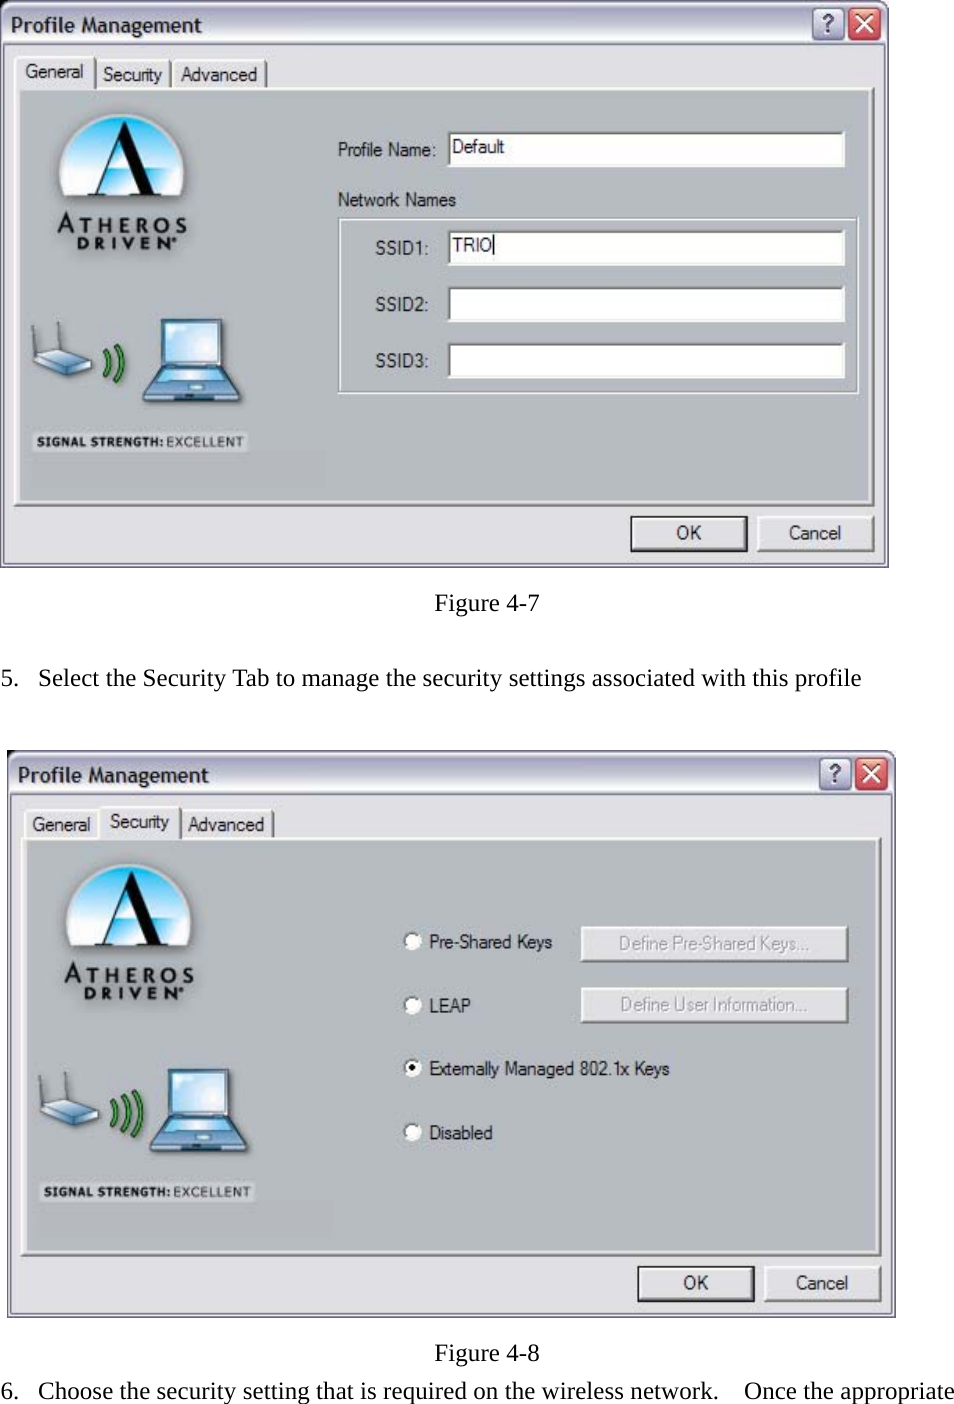  Figure 4-7  5.  Select the Security Tab to manage the security settings associated with this profile   Figure 4-8 6.  Choose the security setting that is required on the wireless network.    Once the appropriate 